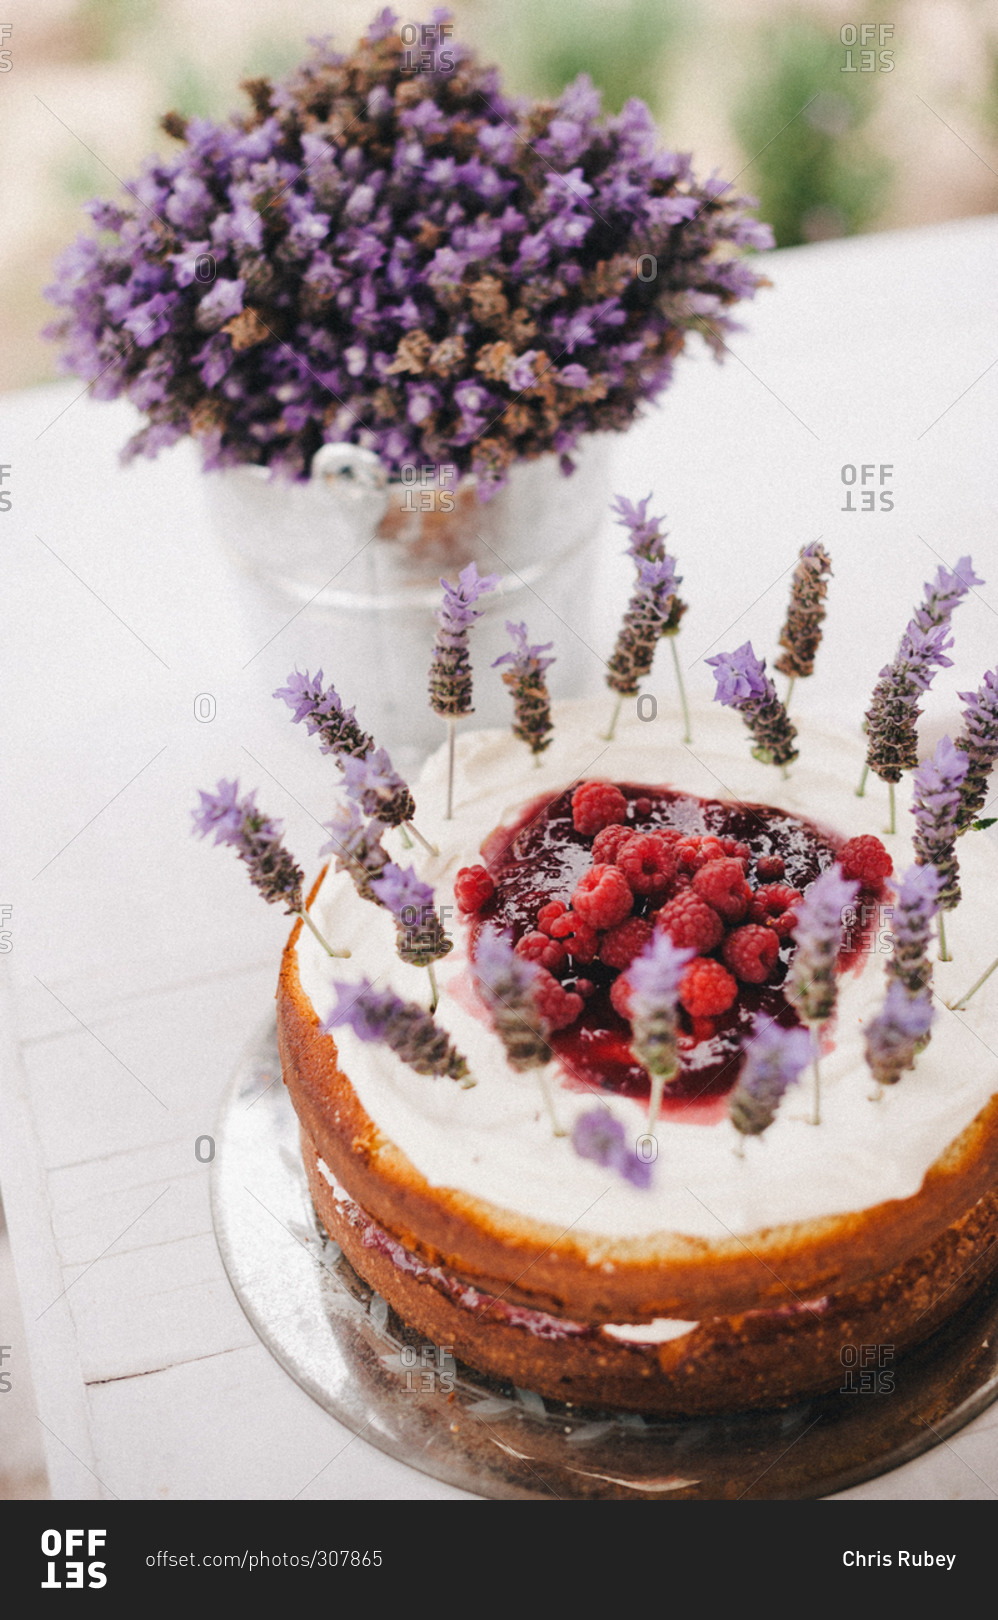 Cake topped with raspberries and purple flowers